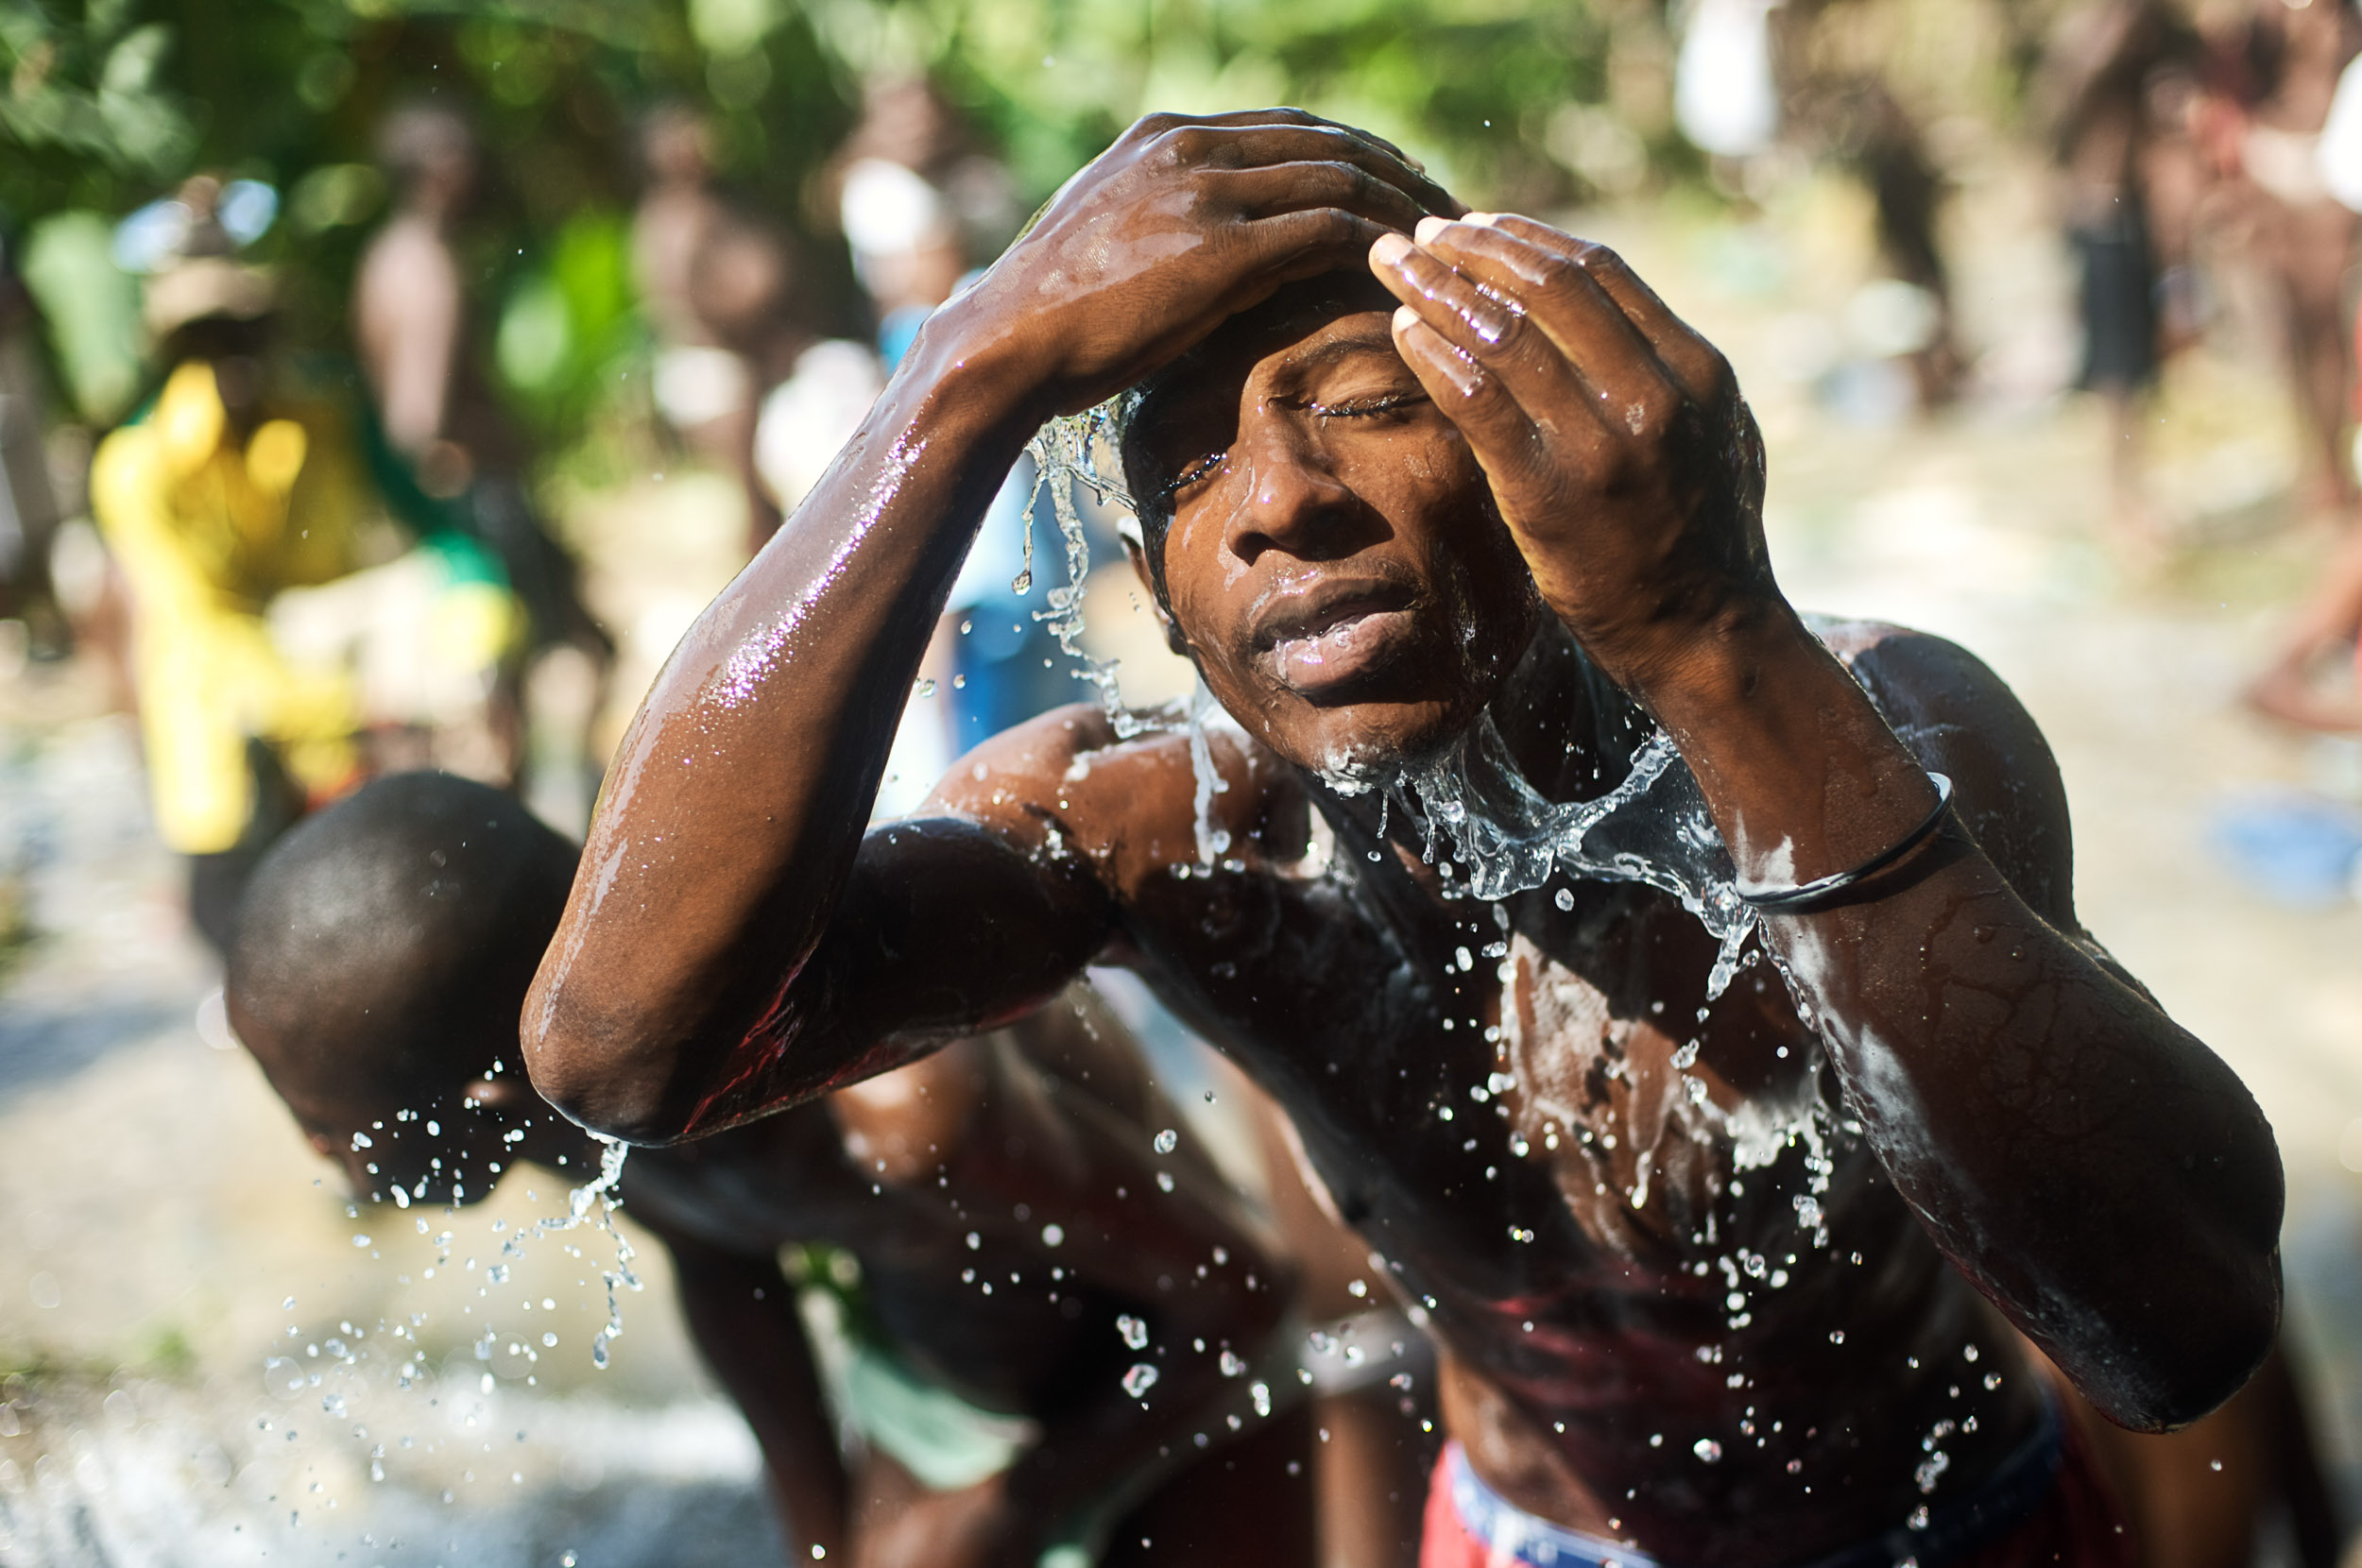 A man splashes water on his face during the Saut D